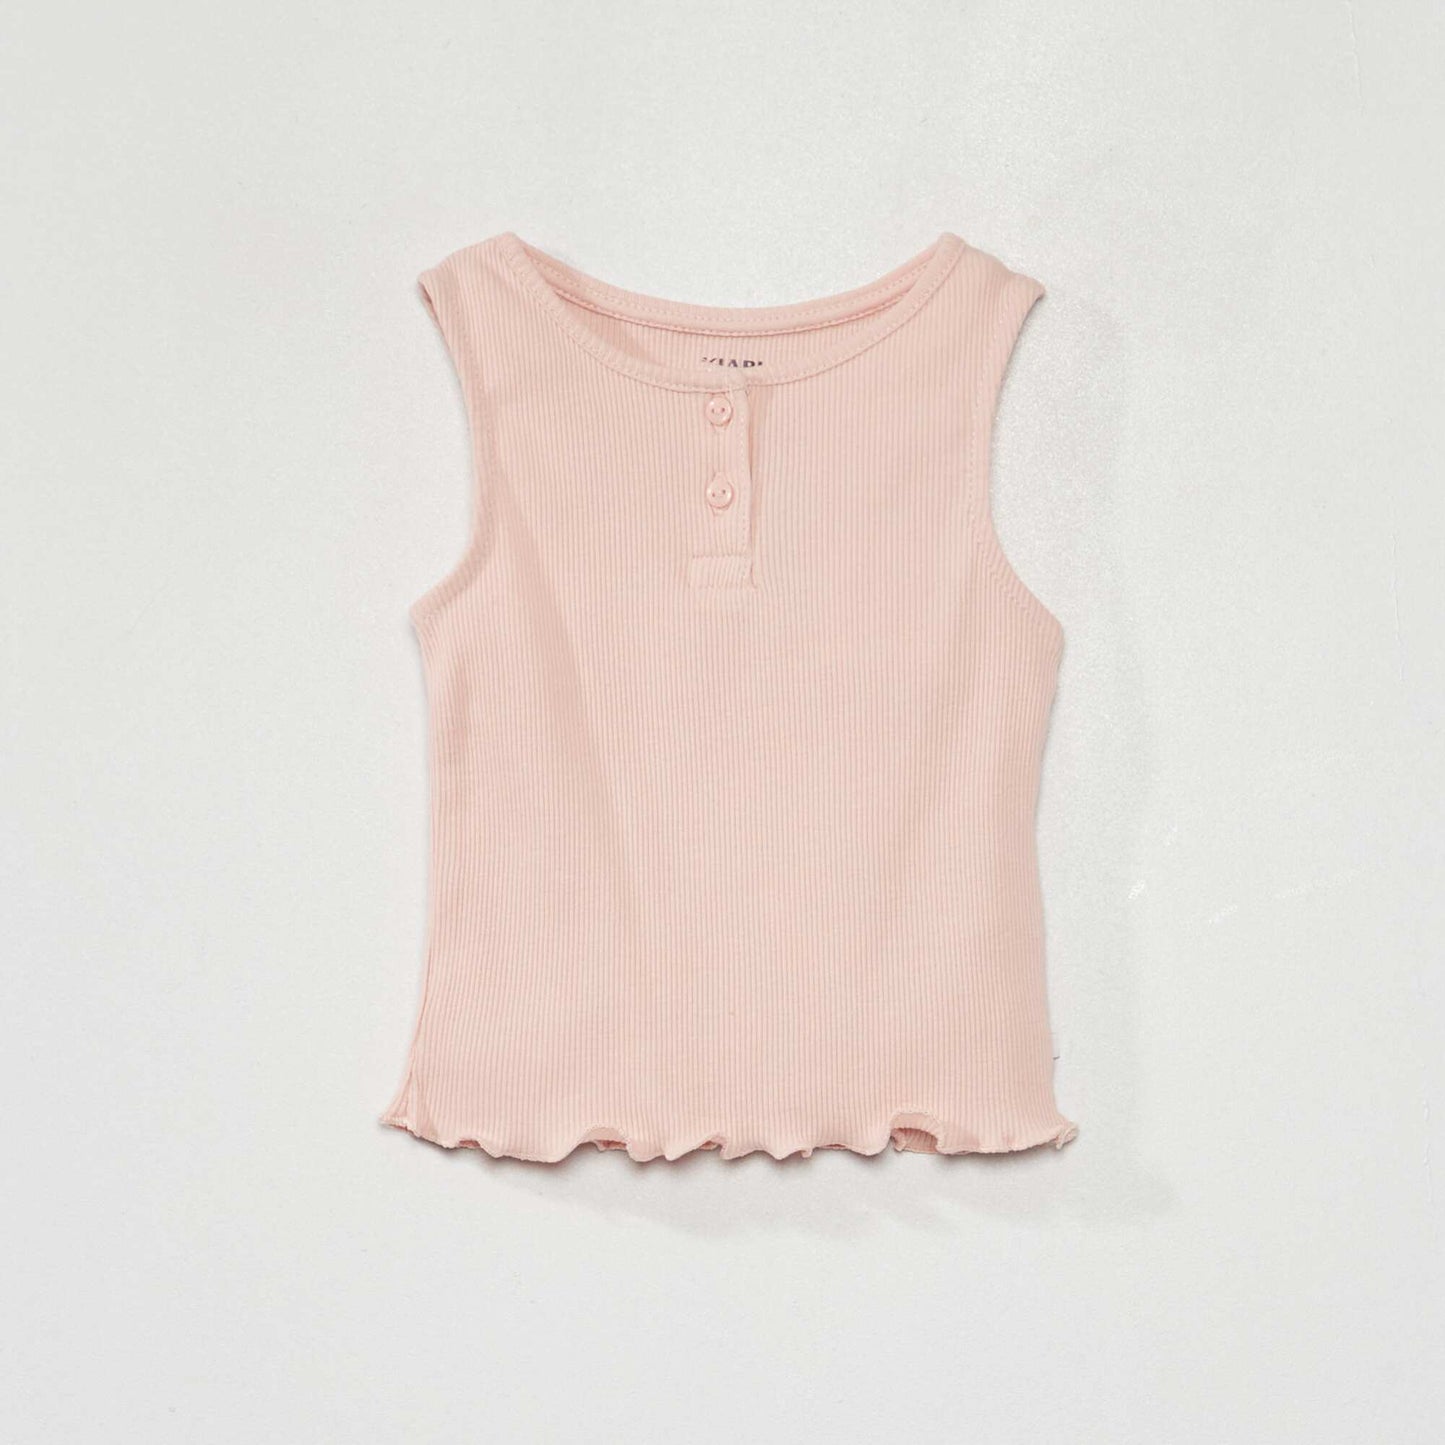 Ribbed vest top with wavy edging PINK